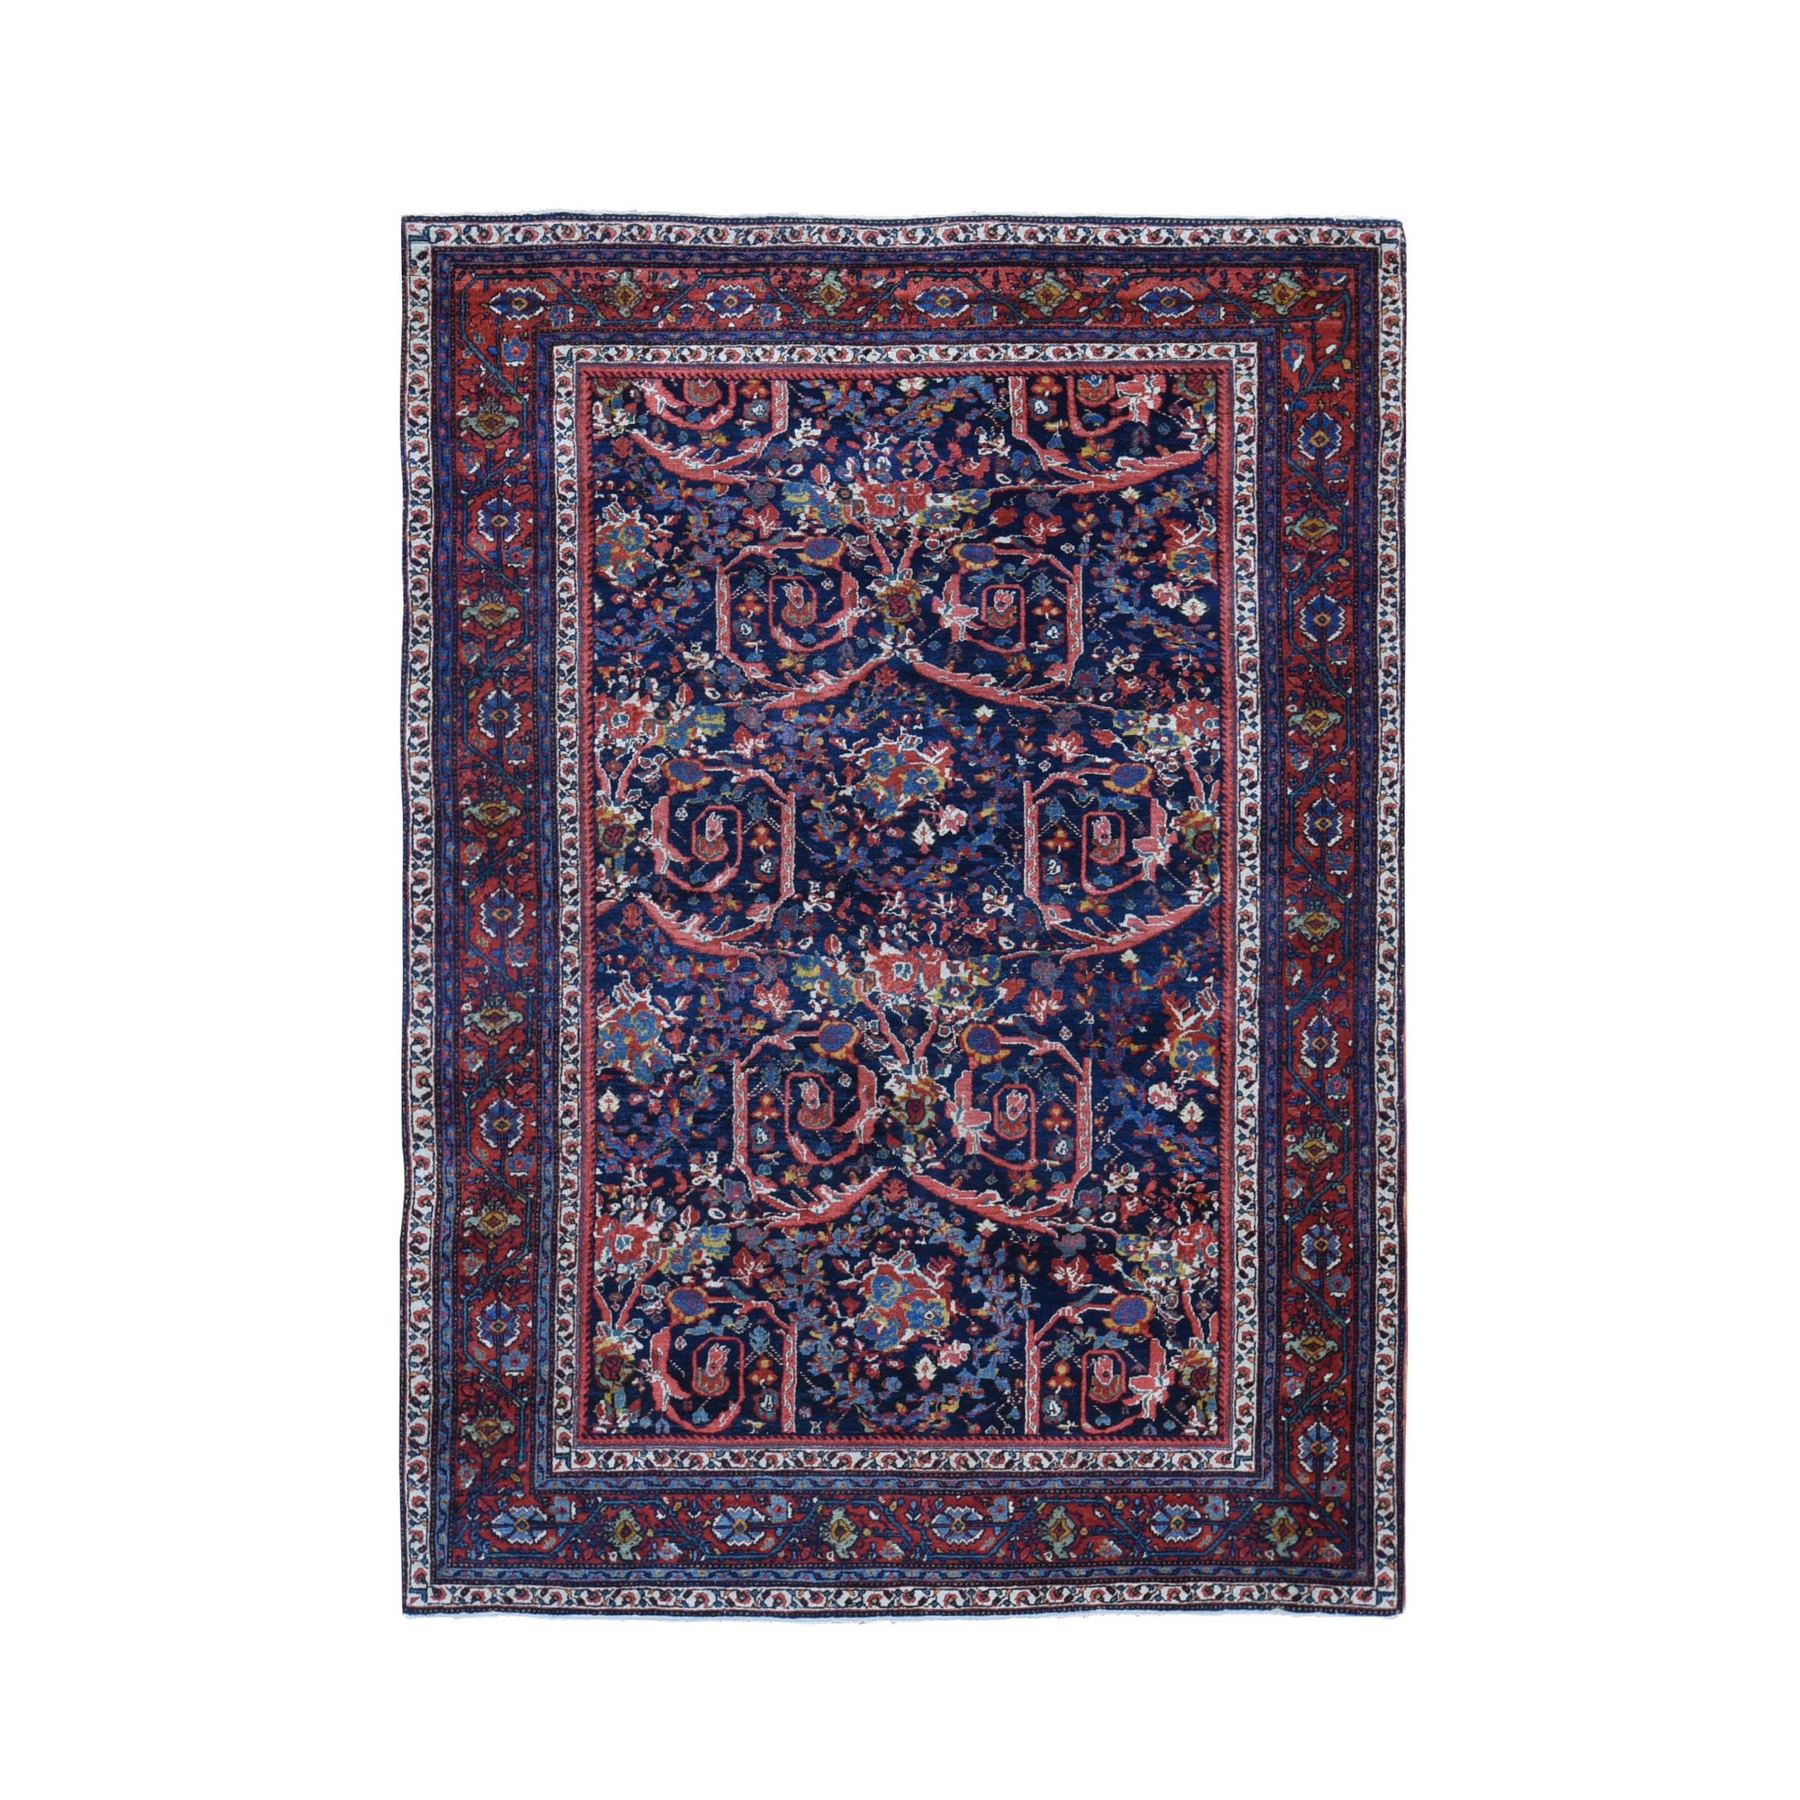  Wool Hand-Knotted Area Rug 4'7